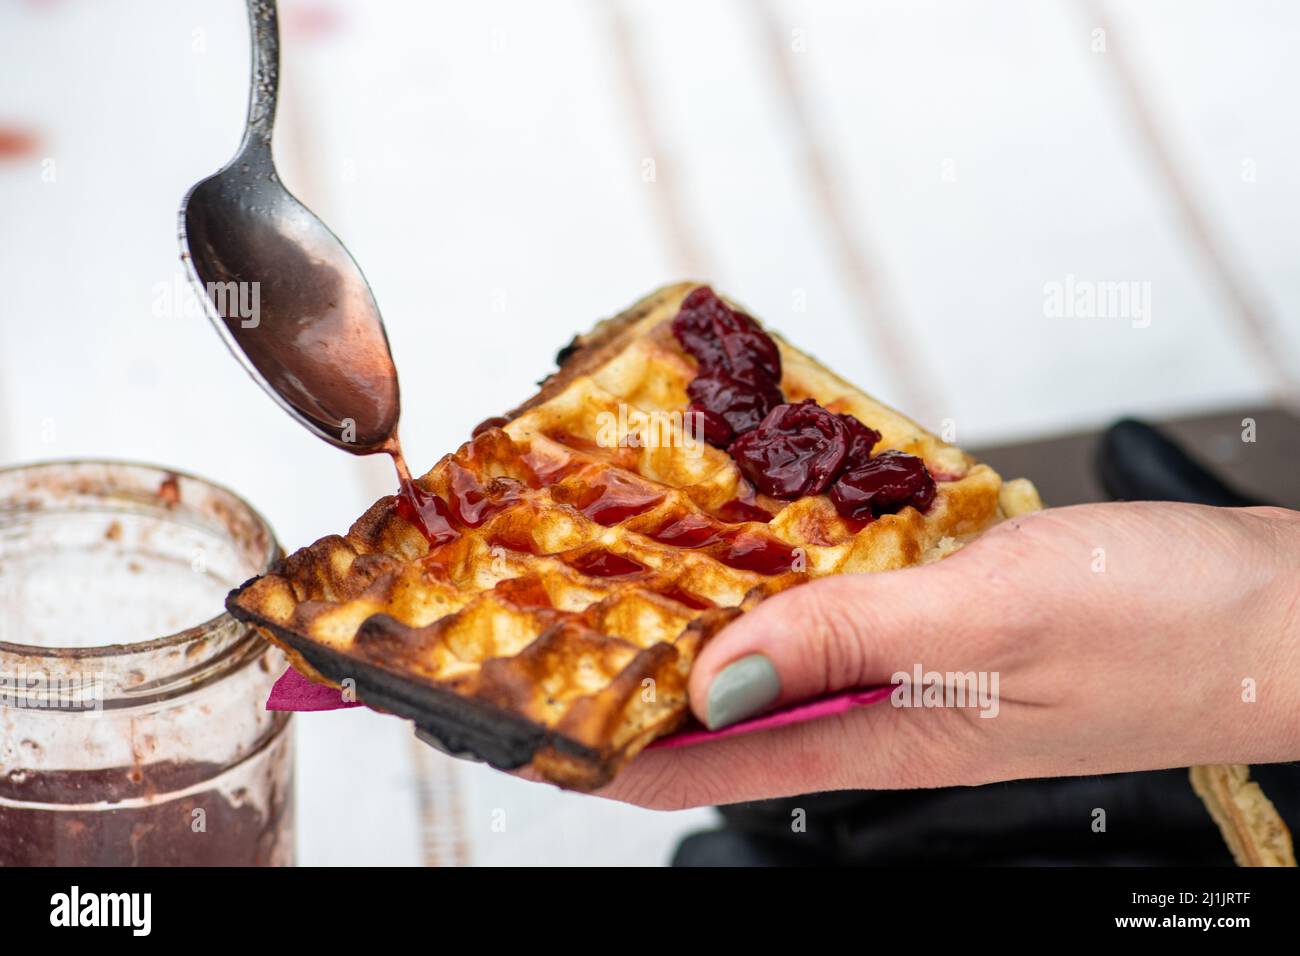 Preparing waffle or waffles with jam, dish made from leavened batter or dough that is cooked between two plates that are patterned Stock Photo